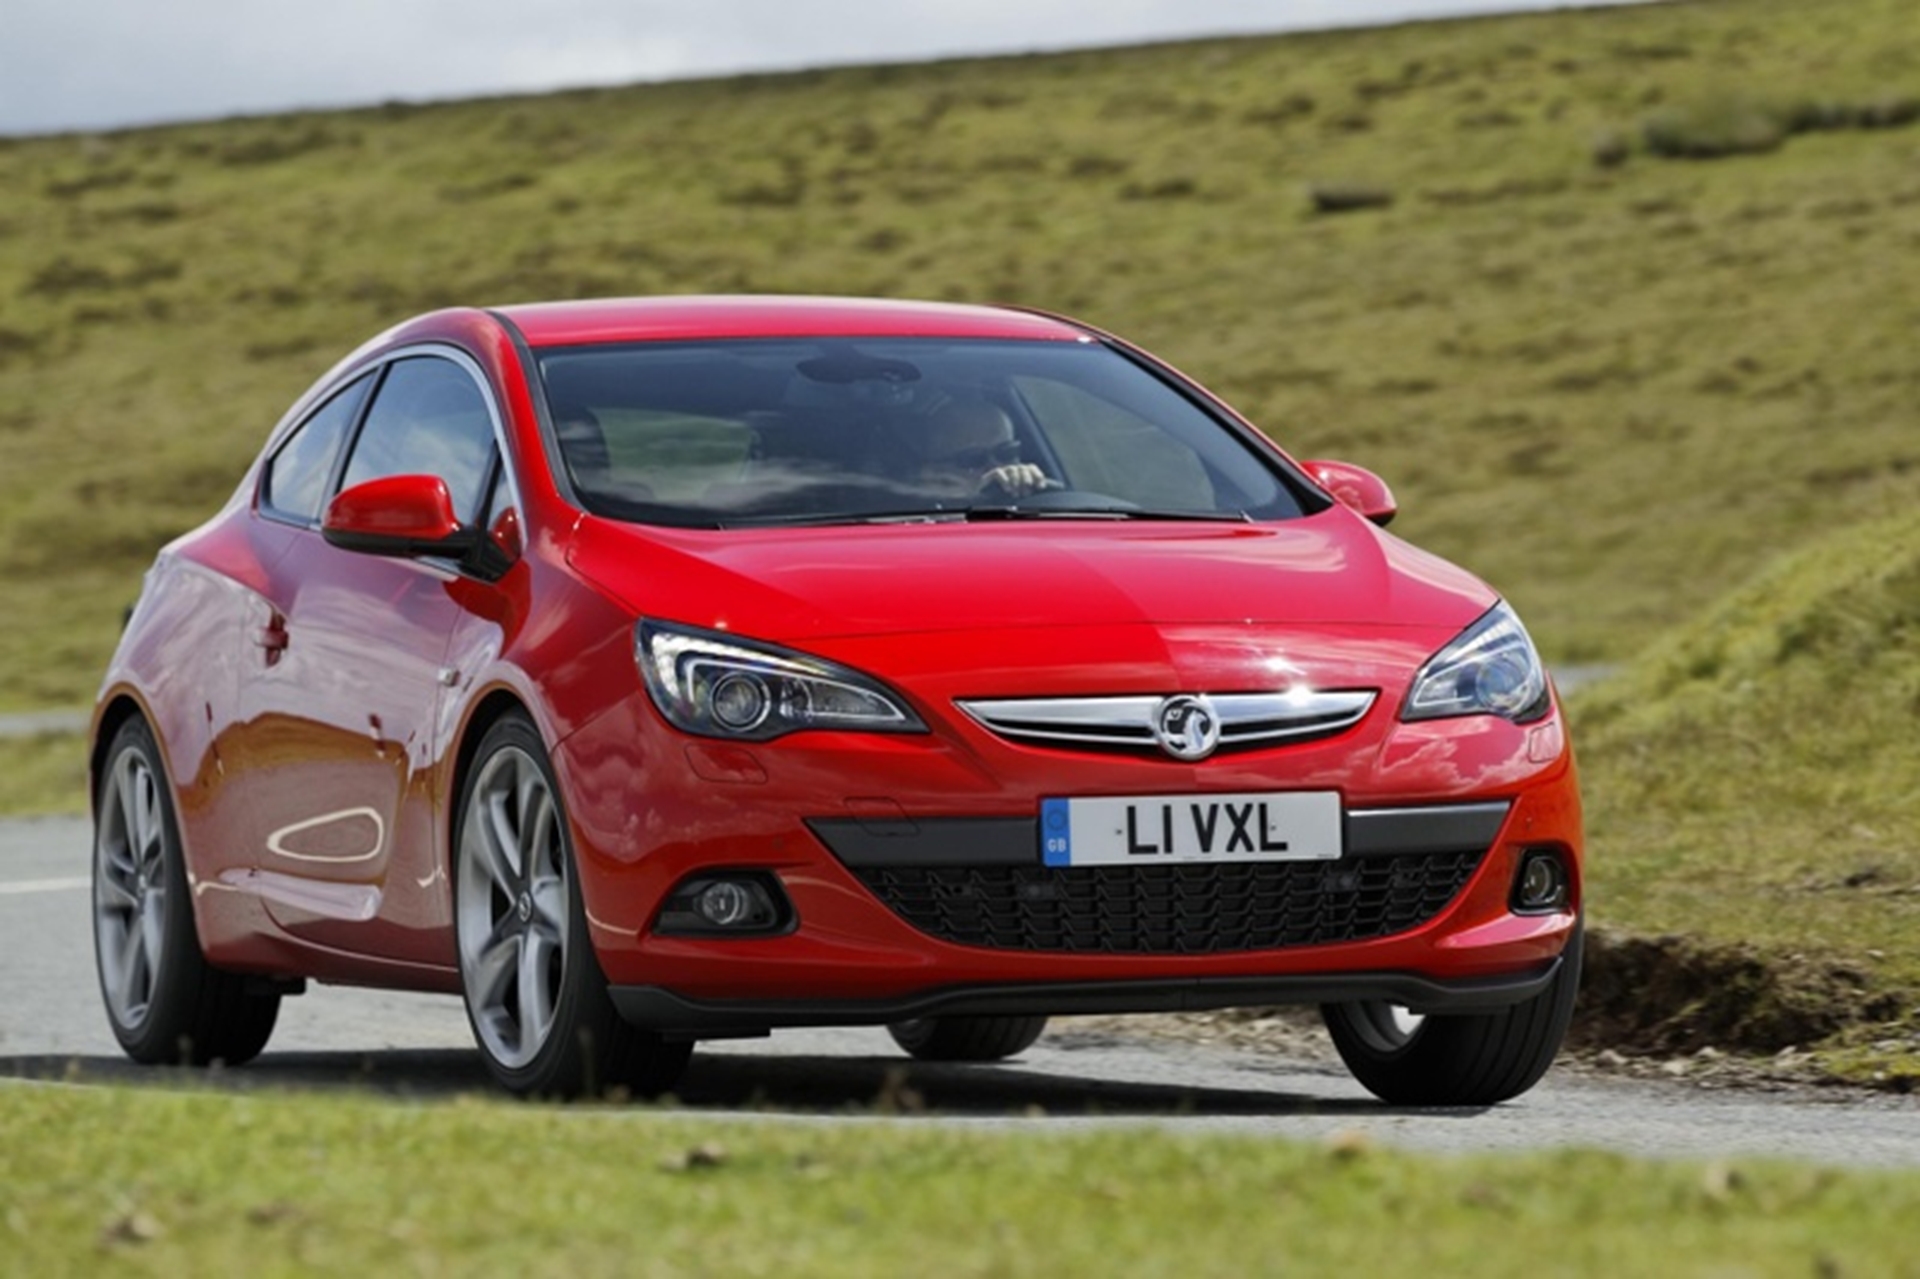 VAUXHALL SHOWS FASTEST GROWTH IN RETAIL SECTOR